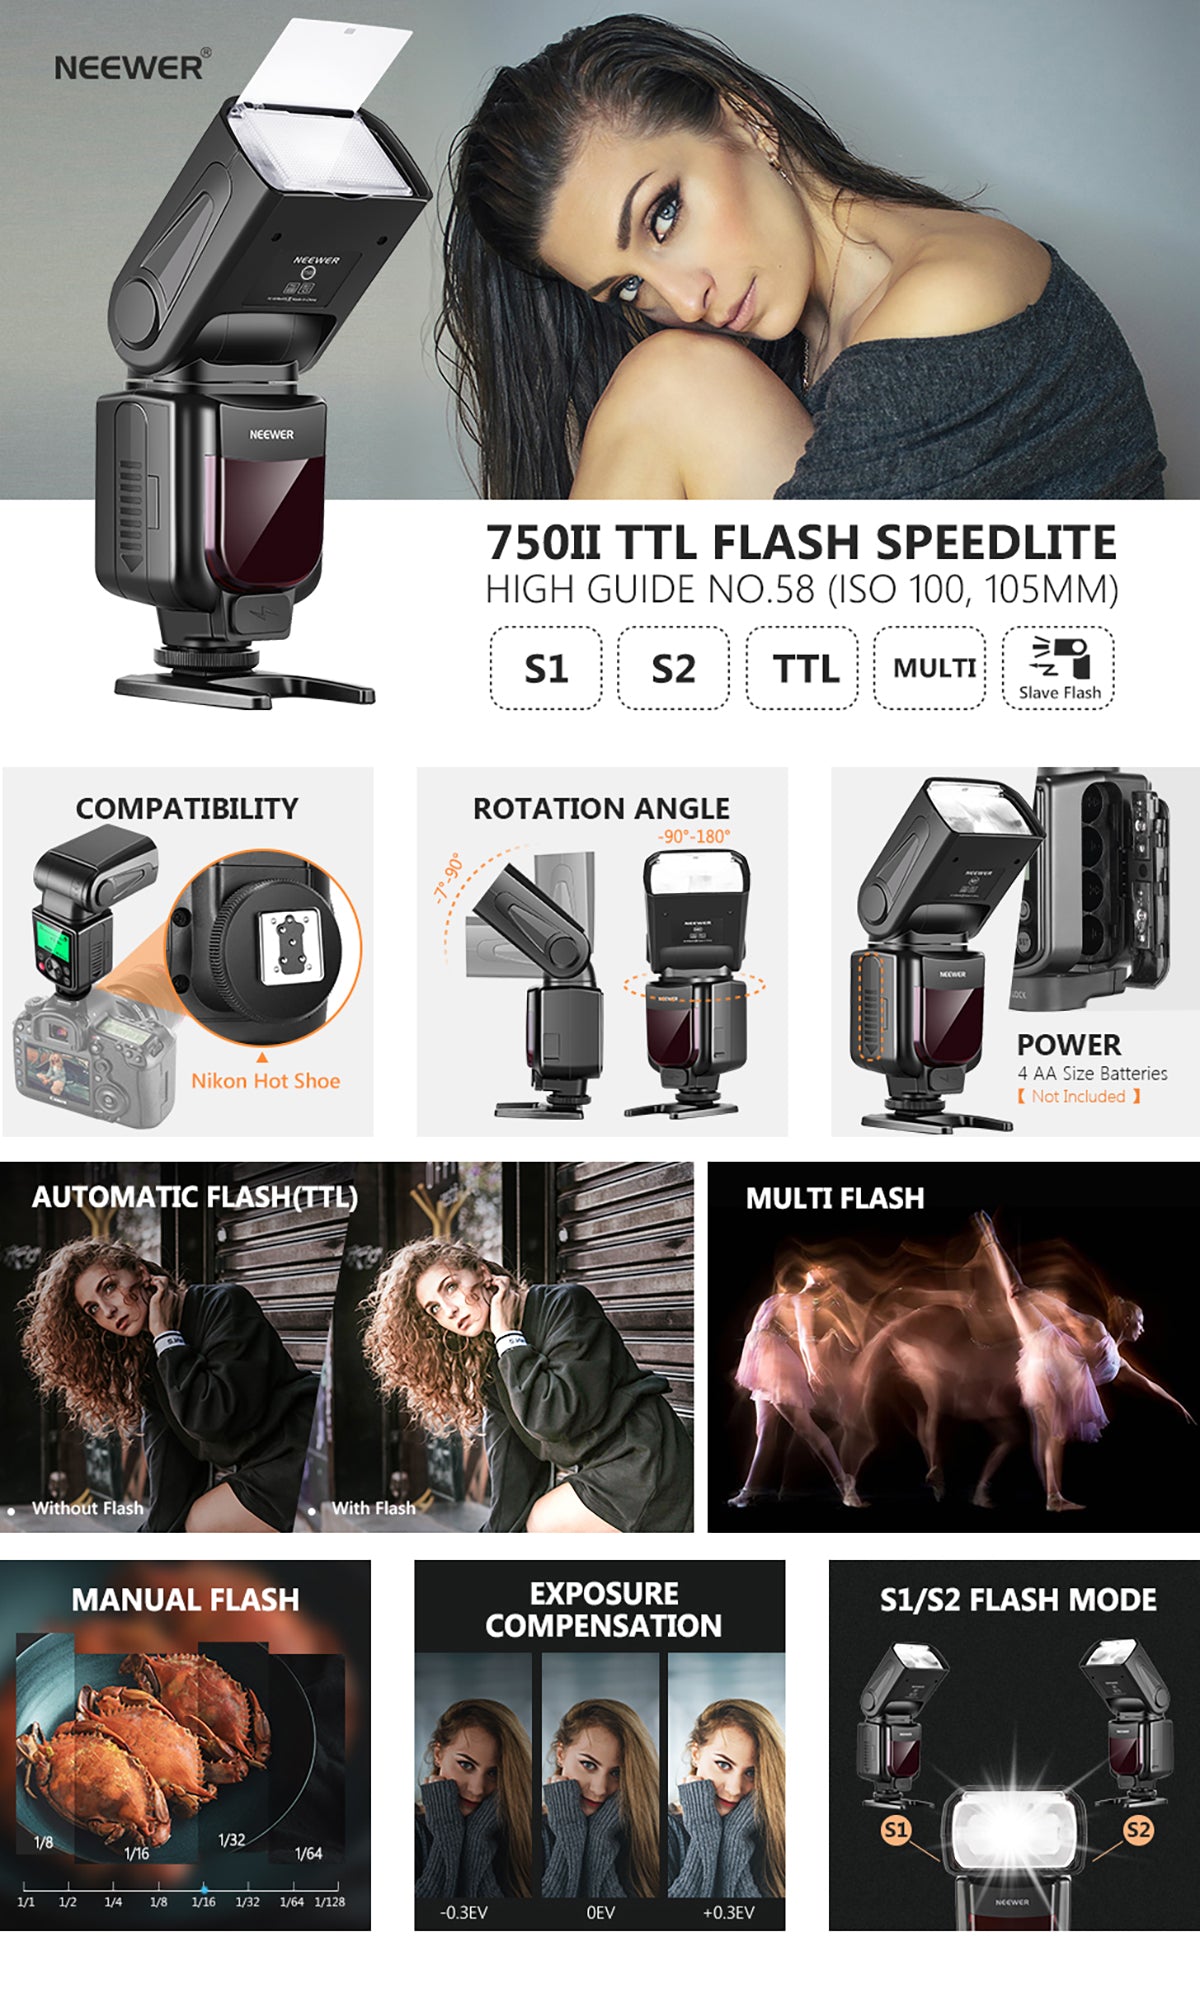 looking at a Godox V1 for my Z6ii what else do I need to get started with  using a off camera flash? Shooting Cocktails and drink pouring shots.  Taking recommendations for other